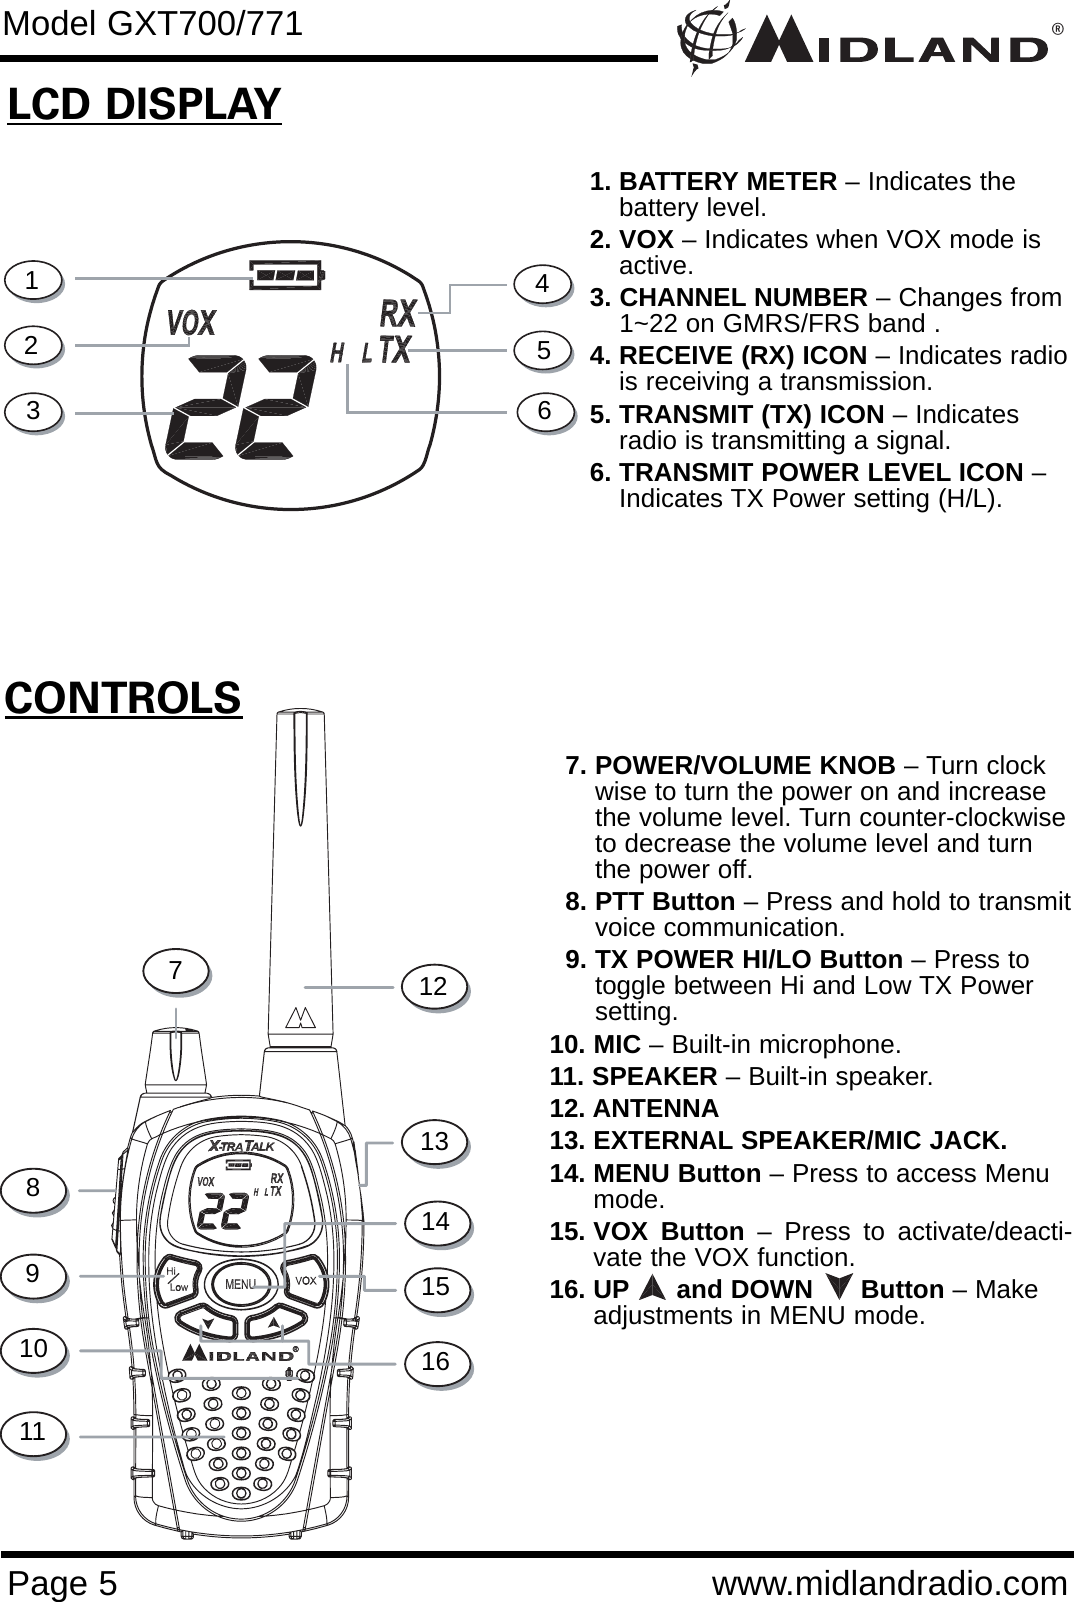 ®Page 5 www.midlandradio.comCONTROLSLCD DISPLAY1. BATTERY METER – Indicates thebattery level.2. VOX – Indicates when VOX mode isactive.3. CHANNEL NUMBER – Changes from 1~22 on GMRS/FRS band .4. RECEIVE (RX) ICON – Indicates radiois receiving a transmission.5. TRANSMIT (TX) ICON – Indicatesradio is transmitting a signal.6. TRANSMIT POWER LEVEL ICON –Indicates TX Power setting (H/L).7. POWER/VOLUME KNOB – Turn clockwise to turn the power on and increasethe volume level. Turn counter-clockwiseto decrease the volume level and turnthe power off.8. PTT Button – Press and hold to transmitvoice communication. 9. TX POWER HI/LO Button – Press totoggle between Hi and Low TX Powersetting.  10. MIC – Built-in microphone.11. SPEAKER – Built-in speaker.12. ANTENNA13. EXTERNAL SPEAKER/MIC JACK.14. MENU Button – Press to access Menumode.  15. VOX  Button – Press to activate/deacti-vate the VOX function.16. UP and DOWN      Button – Makeadjustments in MENU mode.12345678910111615141312Model GXT700/771